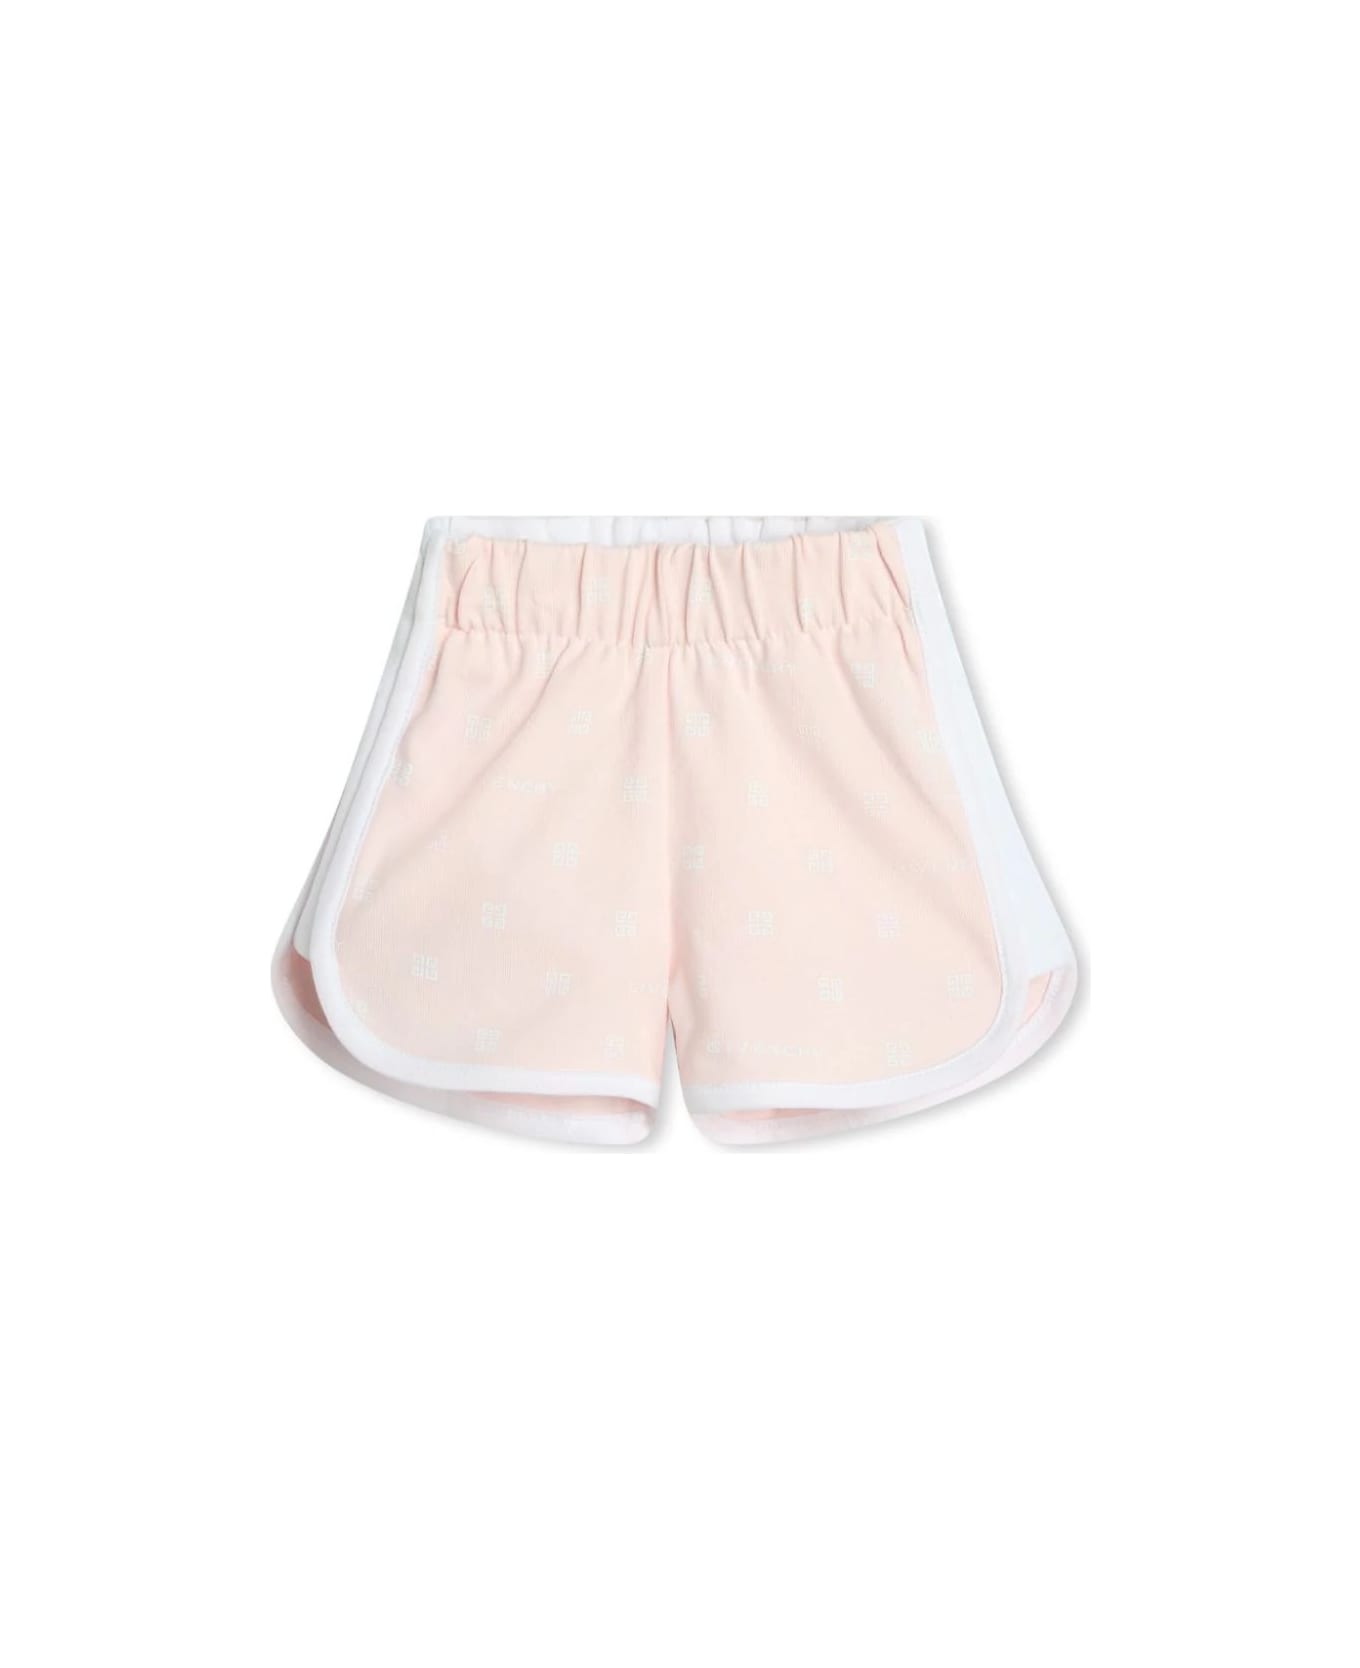 Givenchy White And Pink Set With T-shirt, Shorts And Bandana - Pink ボディスーツ＆セットアップ